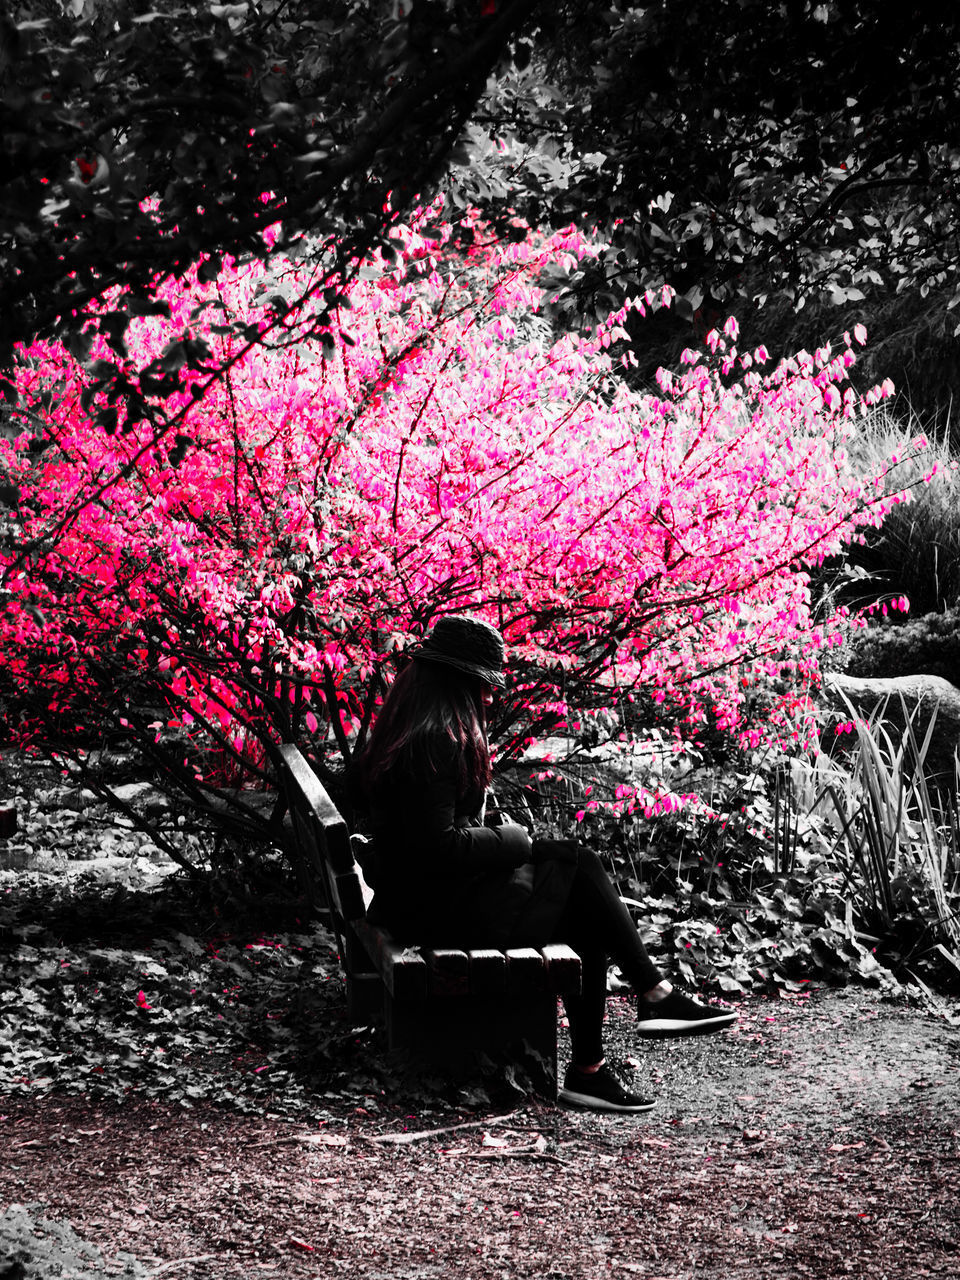 WOMAN SITTING ON BENCH BY FLOWERING TREE